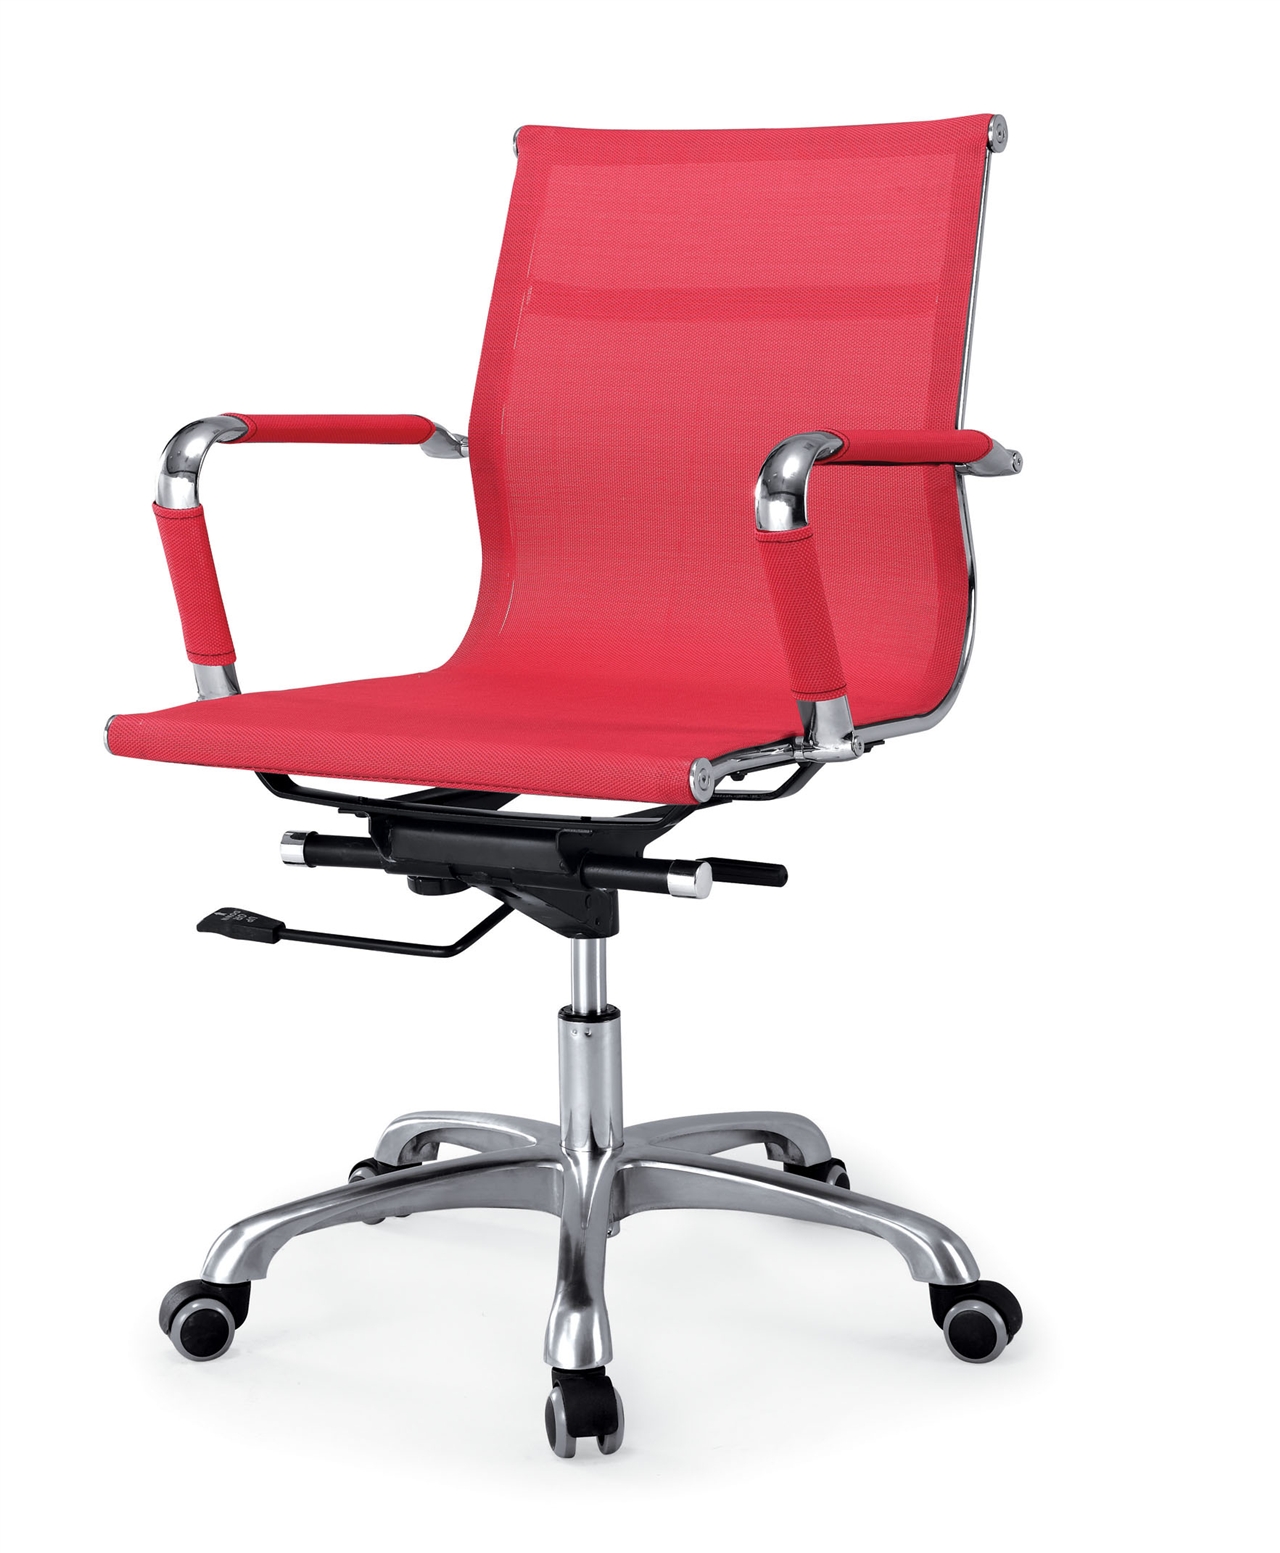 ZHMSOC-01 High Back Swivel Office Chair with Mesh Back and Seat